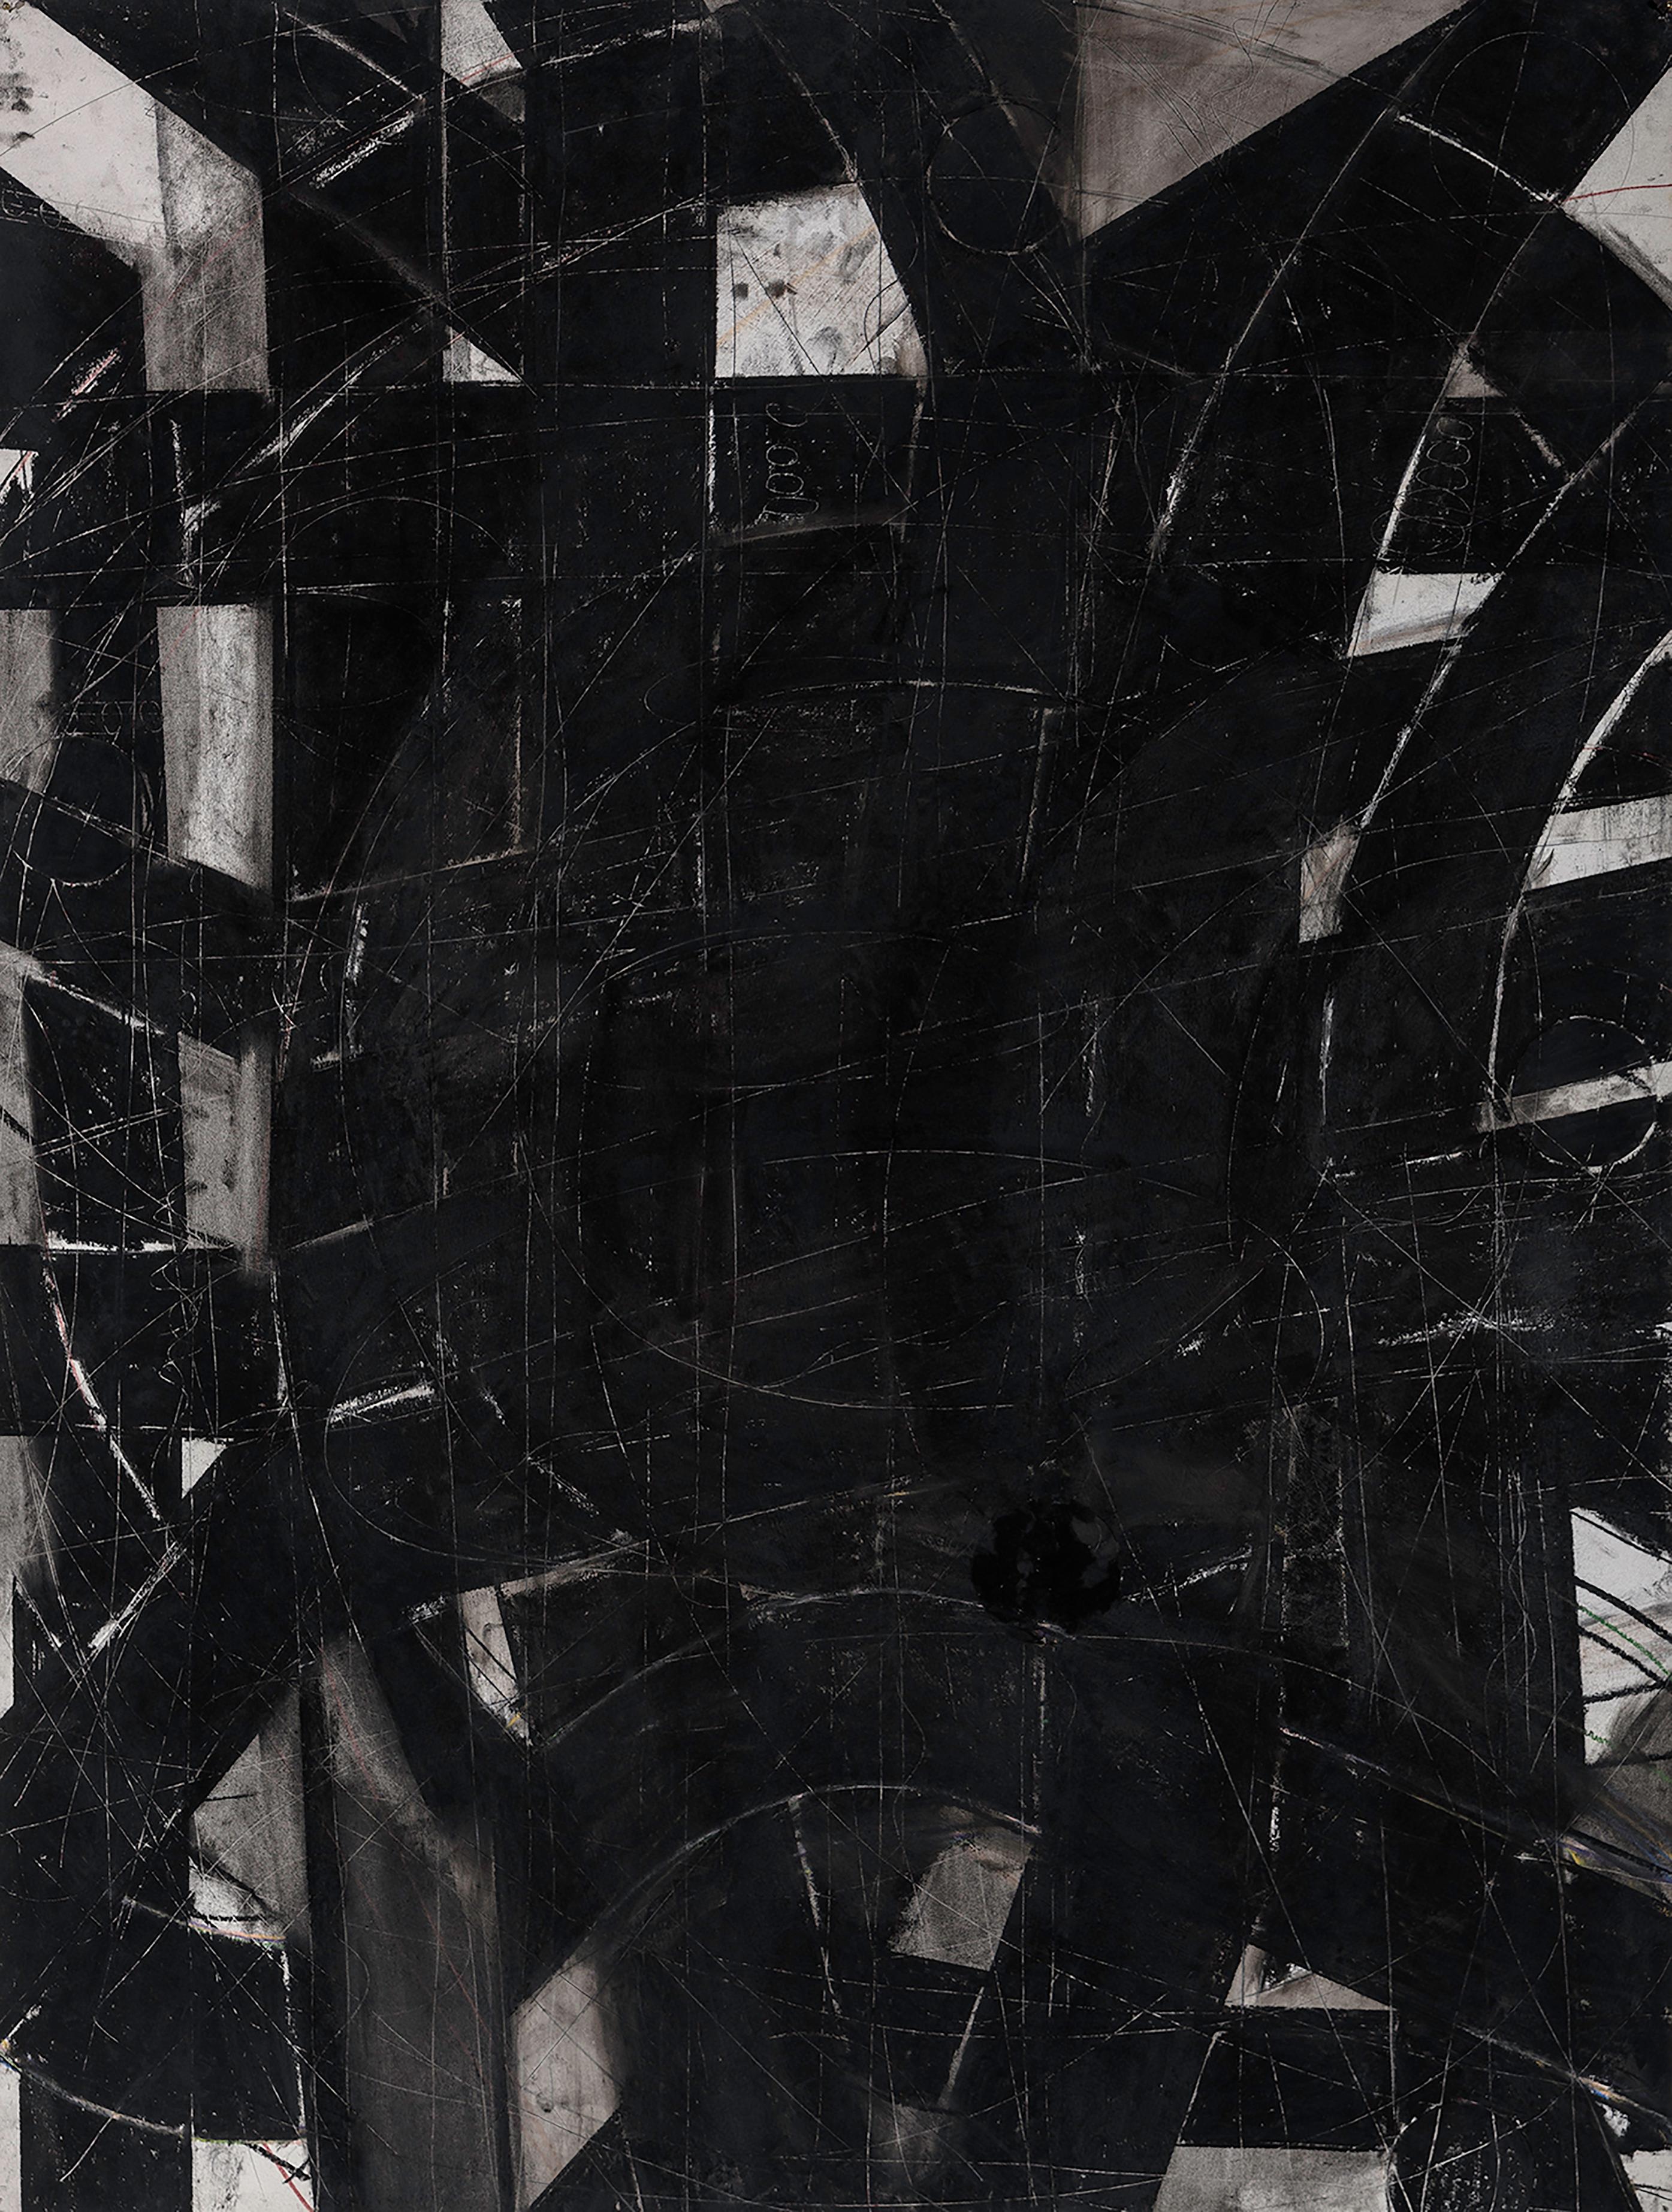 Trevor Norris Abstract Painting - “Urban Interstitial Abstraction #6” – Charcoal and Pastel on Paper - Unframed